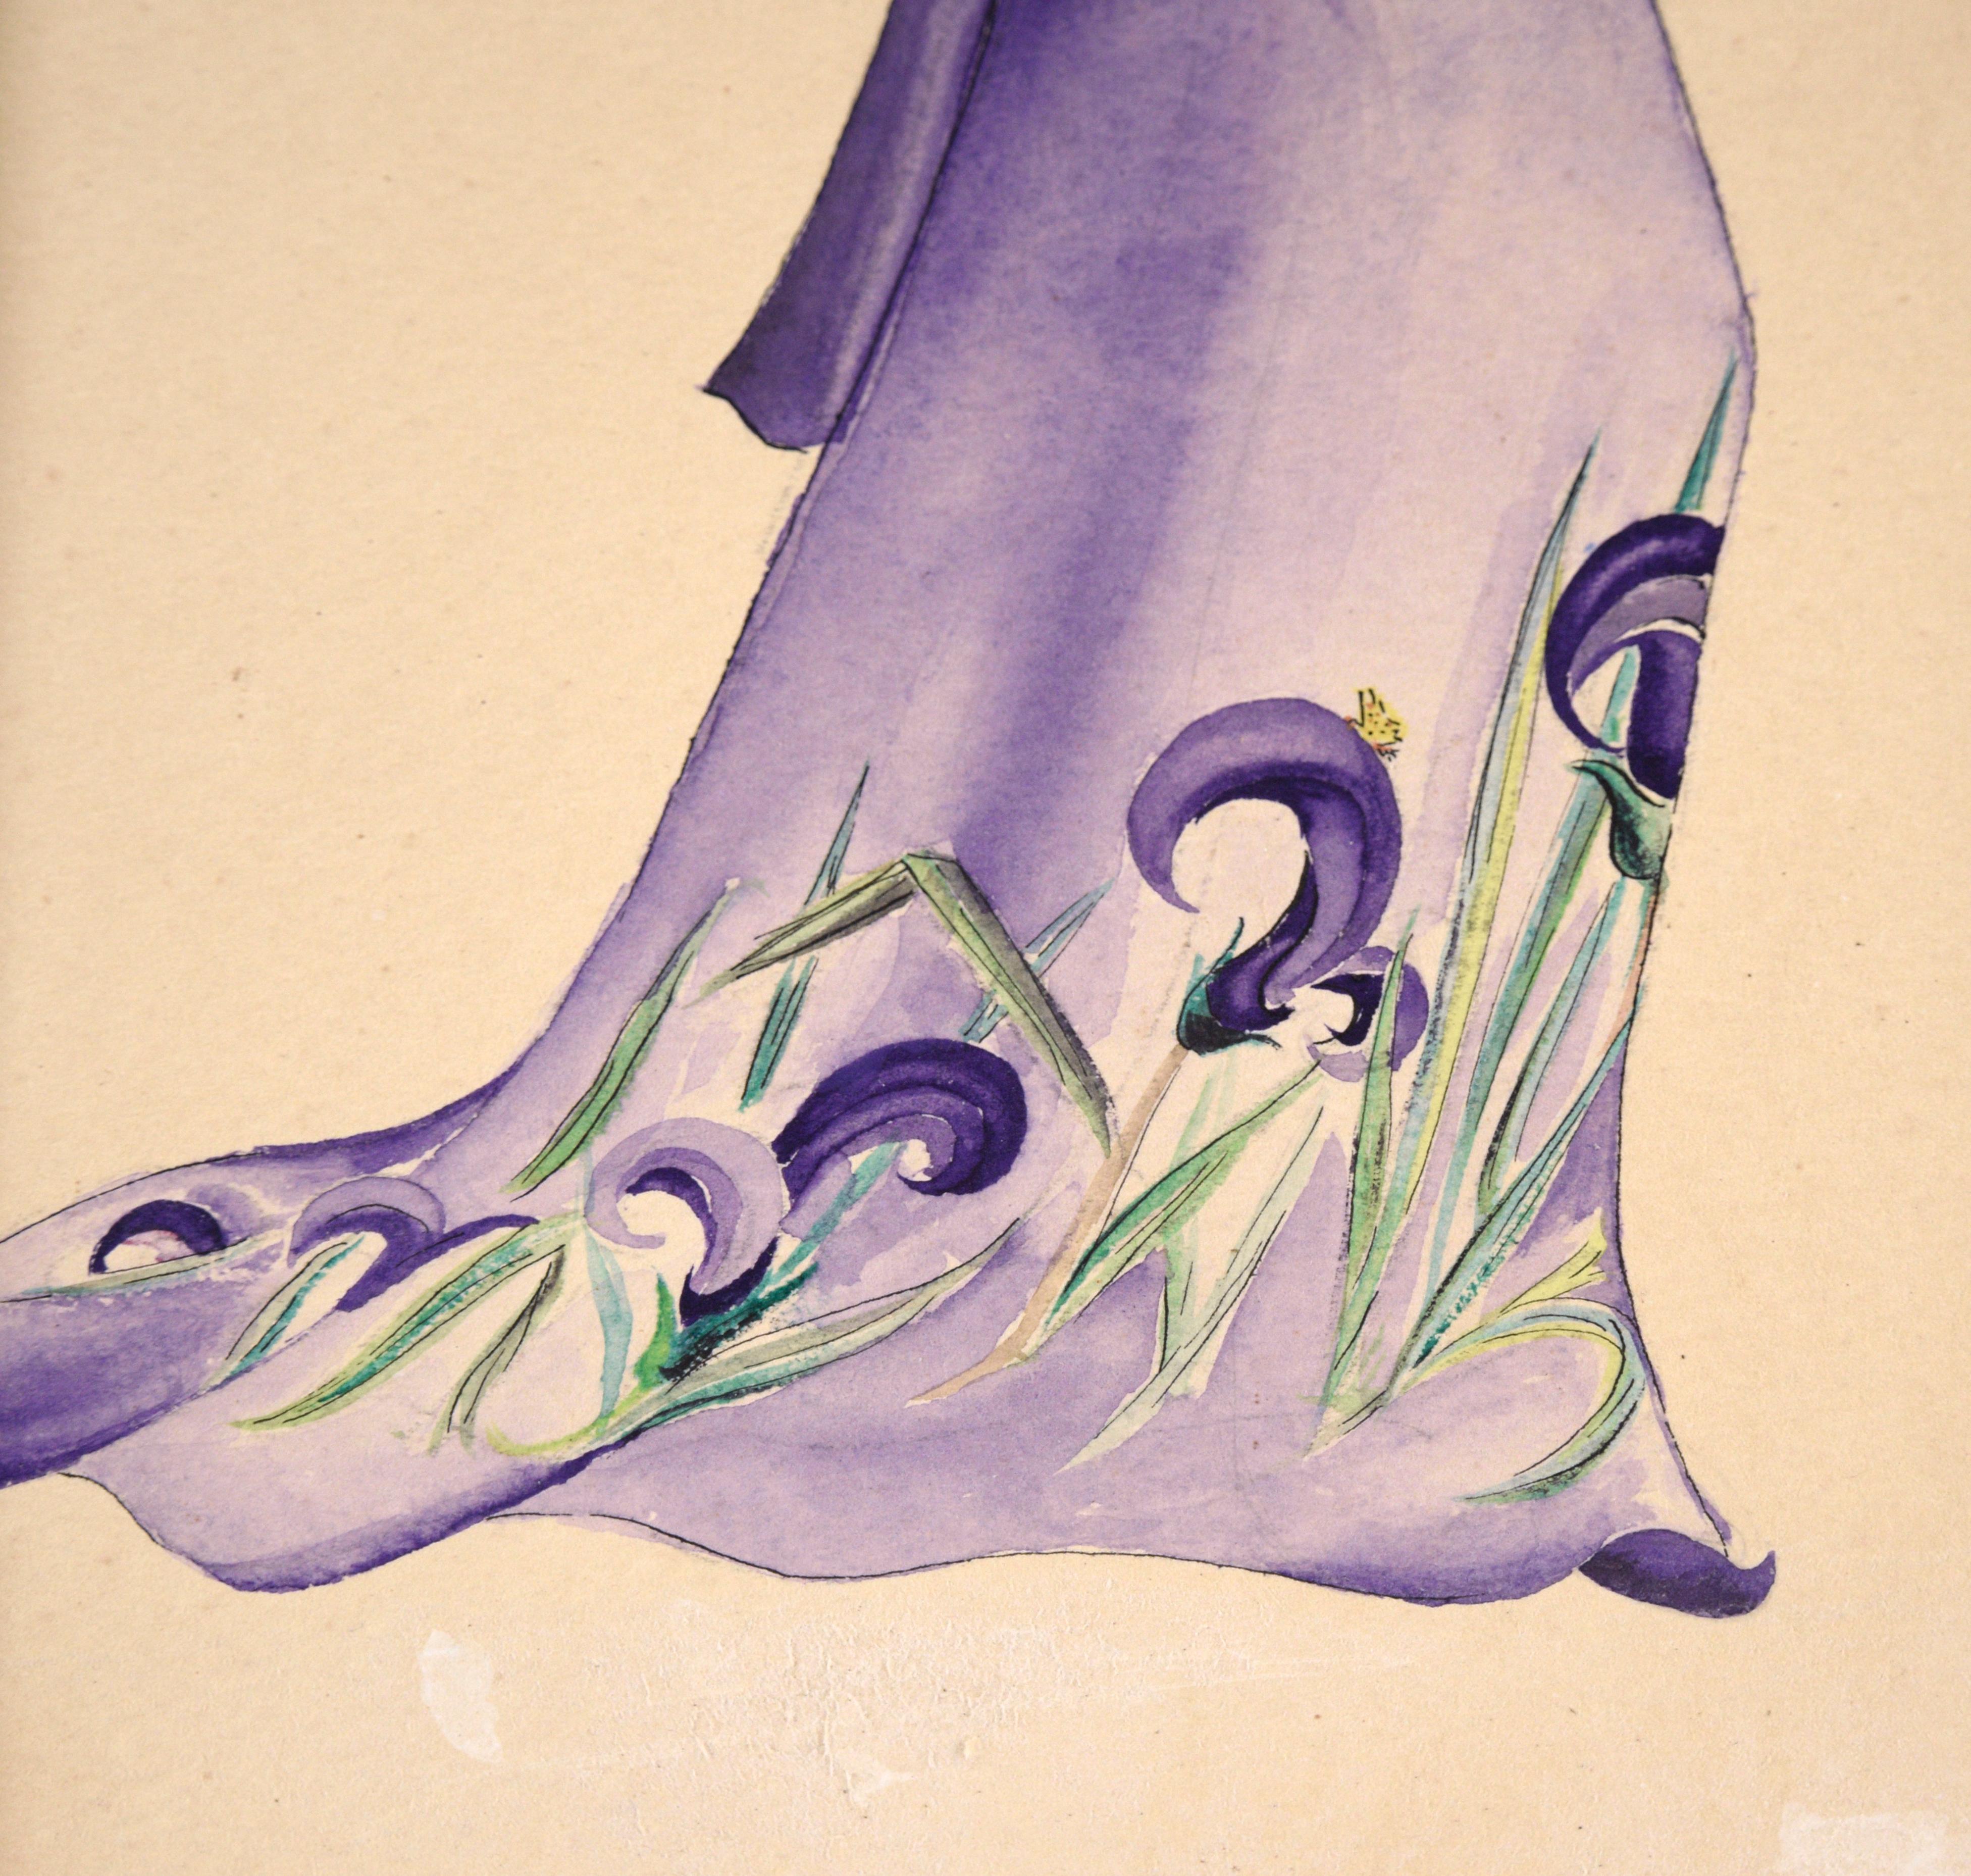 Pair of fashion illustrations by Koyama (20th Century). Two illustrations of the same dress, one with an additional layer of purple gouache. The figure depicted is tall and lean, with black hair pinned up. These pieces are in an art deco style, with